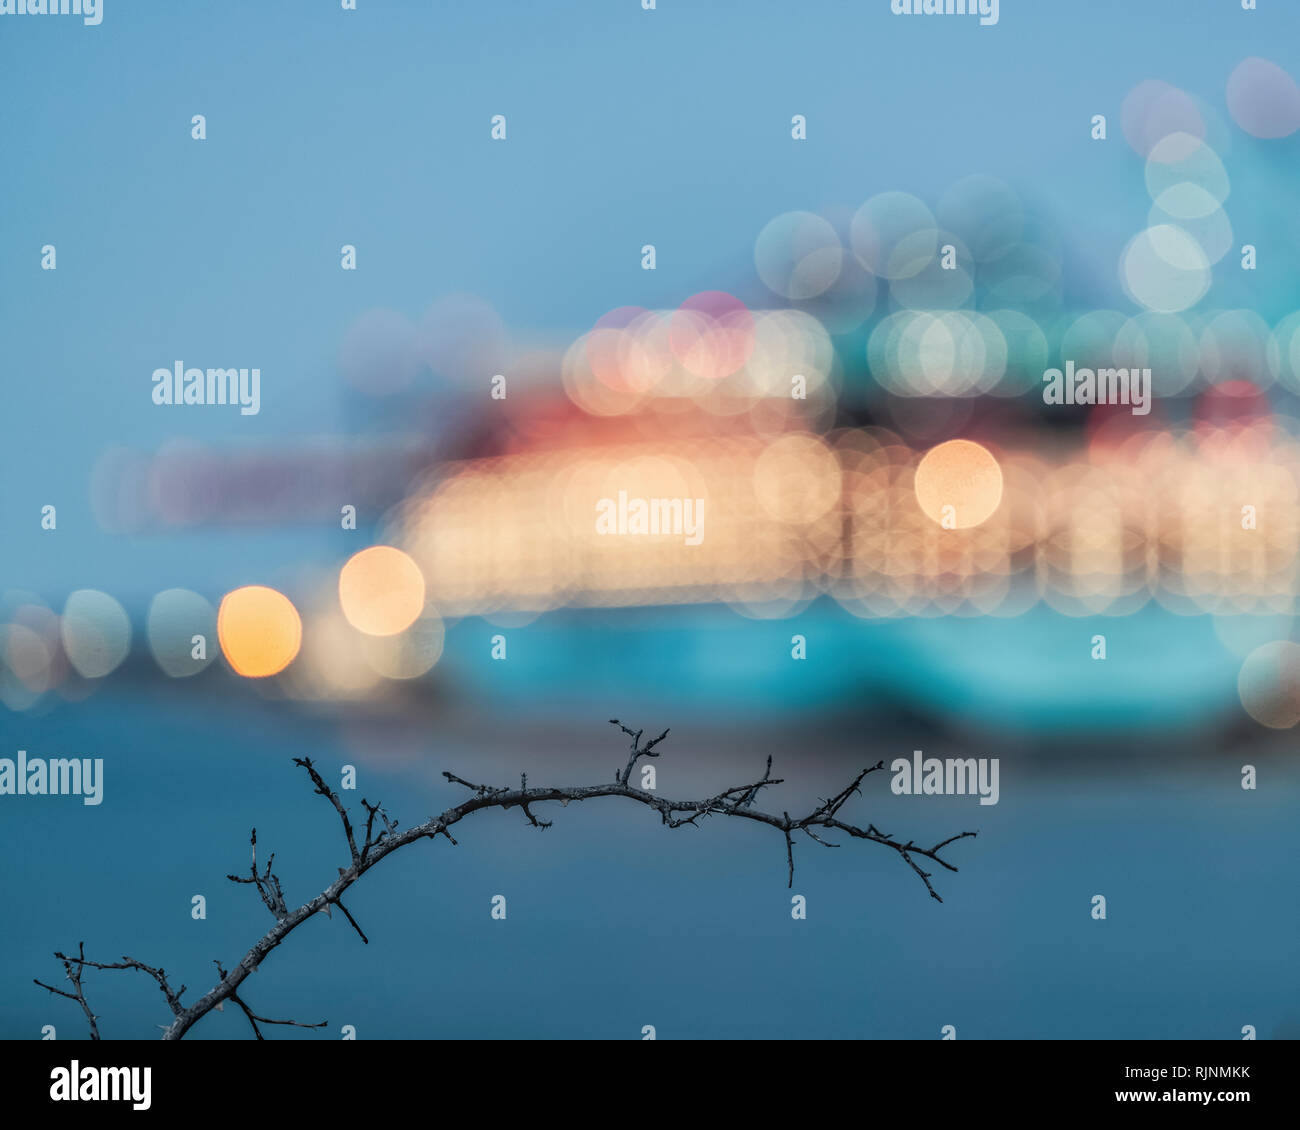 Twig in front of blurred ship, illuminated at dusk, differential focus, Gothenburg, Sweden, Europe Stock Photo